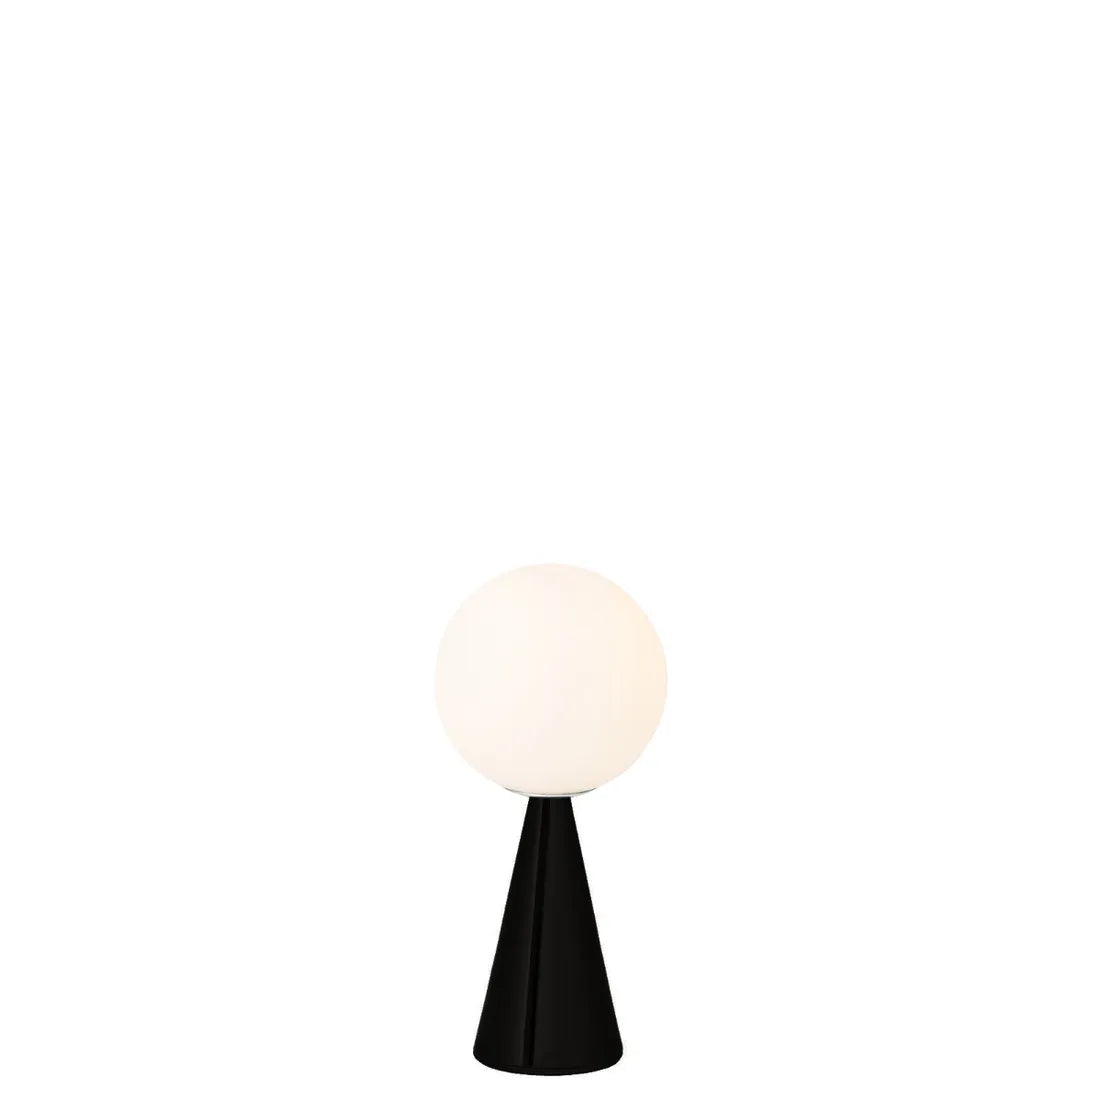 designer table lamps online, table lamps india, new mini lamps for dining table black